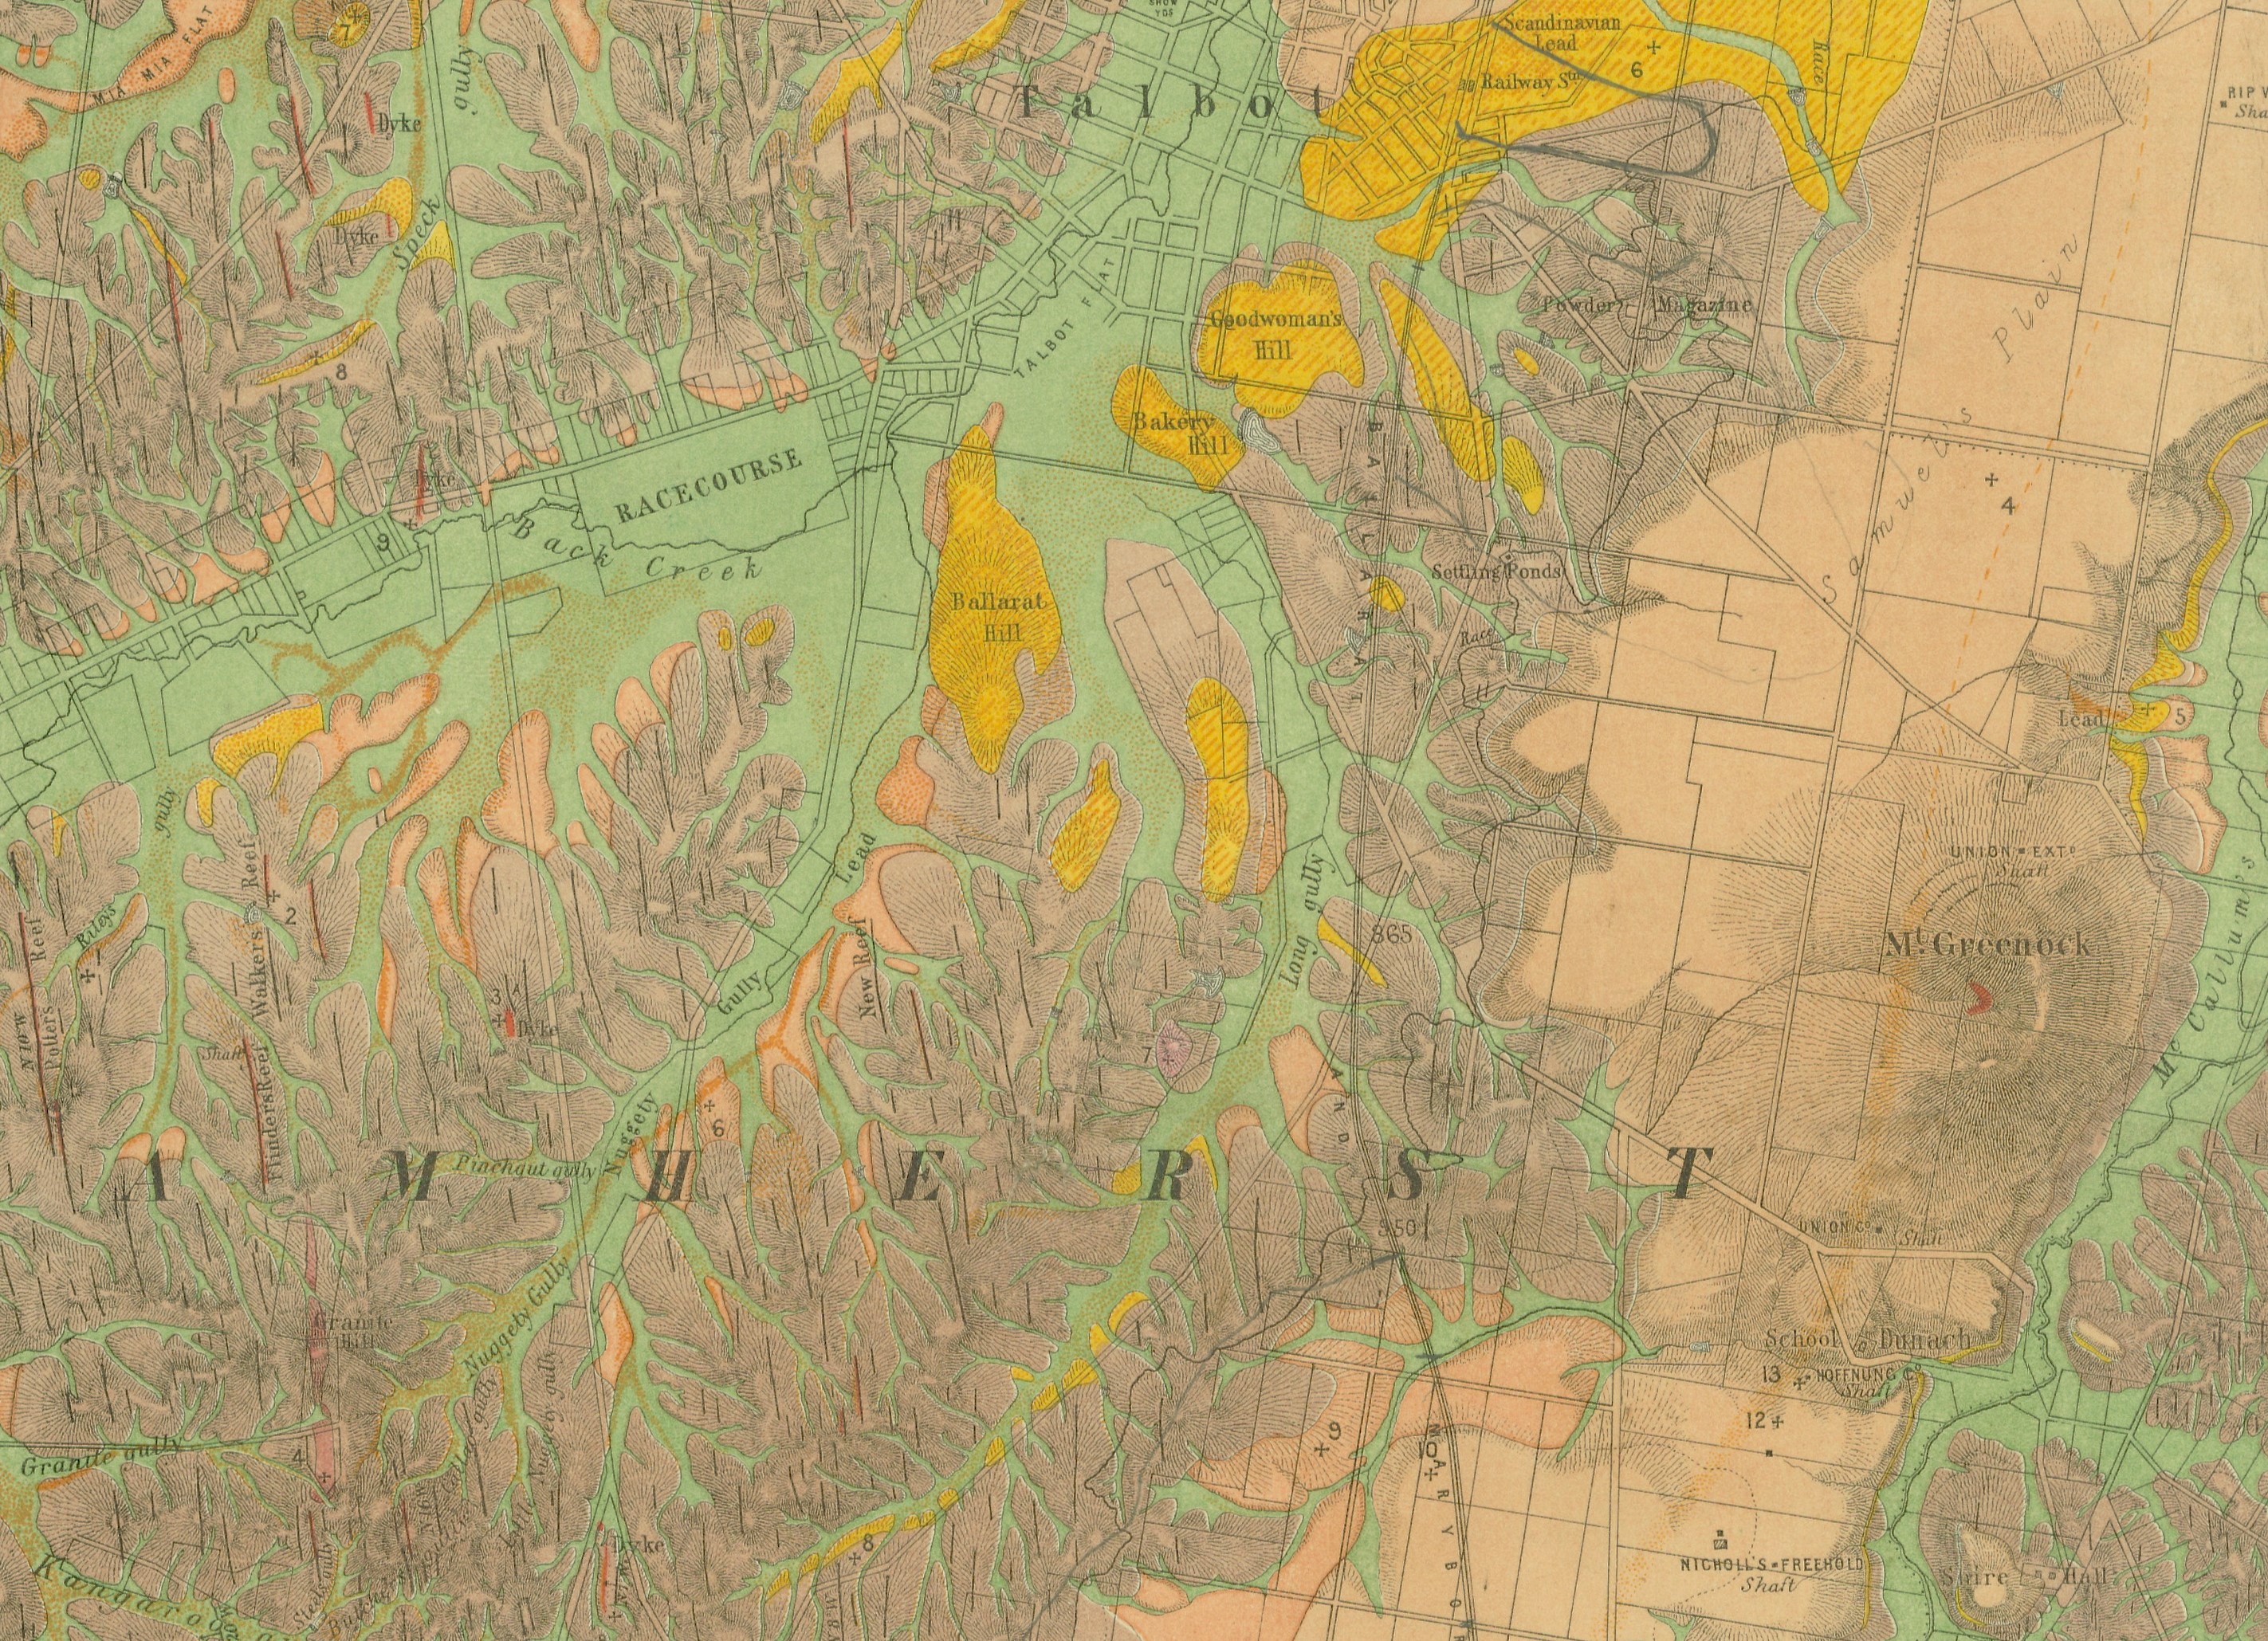 Map showing Gold diggings in the Talbot and Amherst area